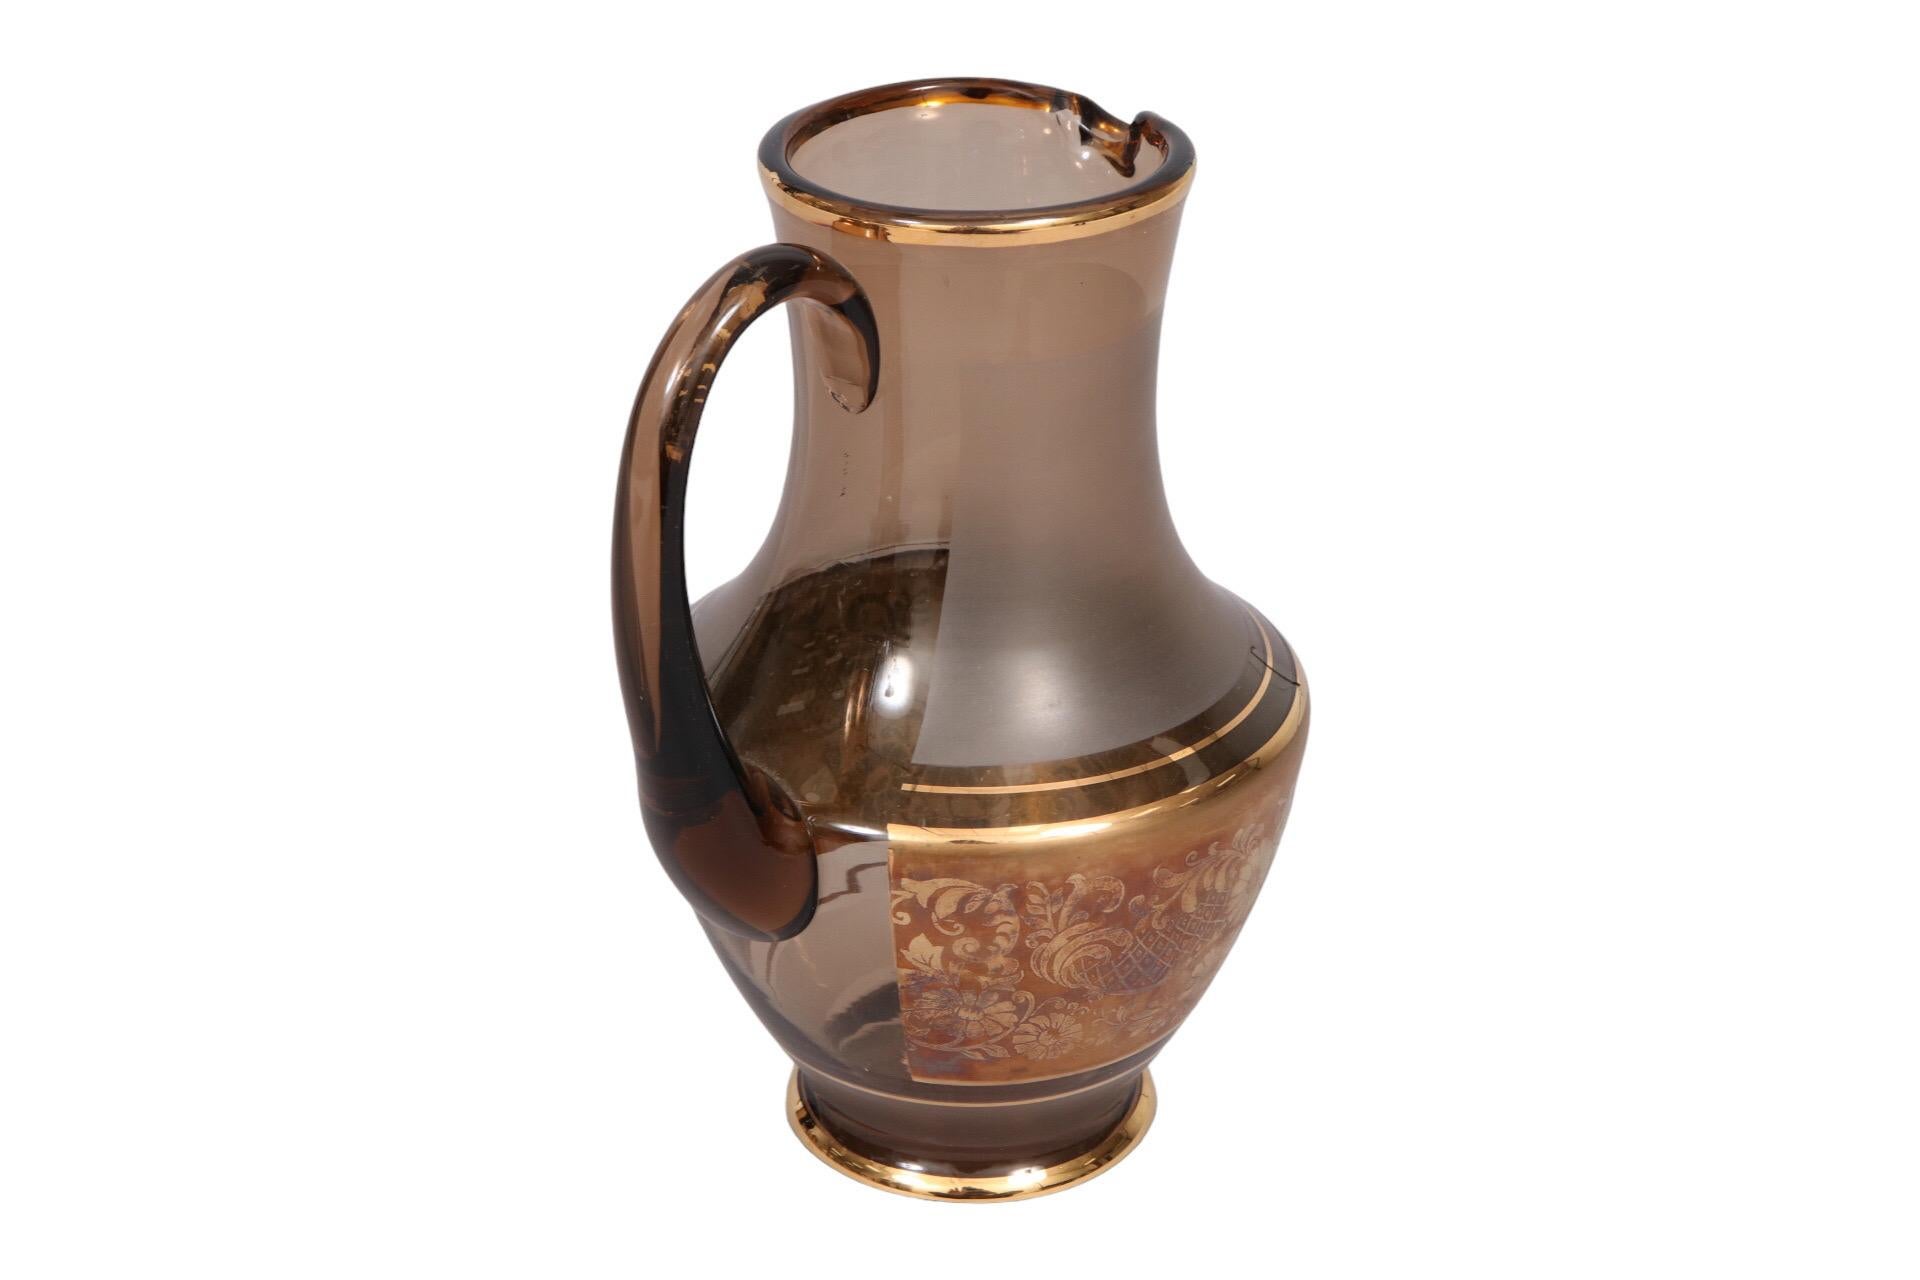 A midcentury frosted glass pitcher. The brown frosted glass has a thick gold band adorned with floral details around the middle and is edged with gold lines.